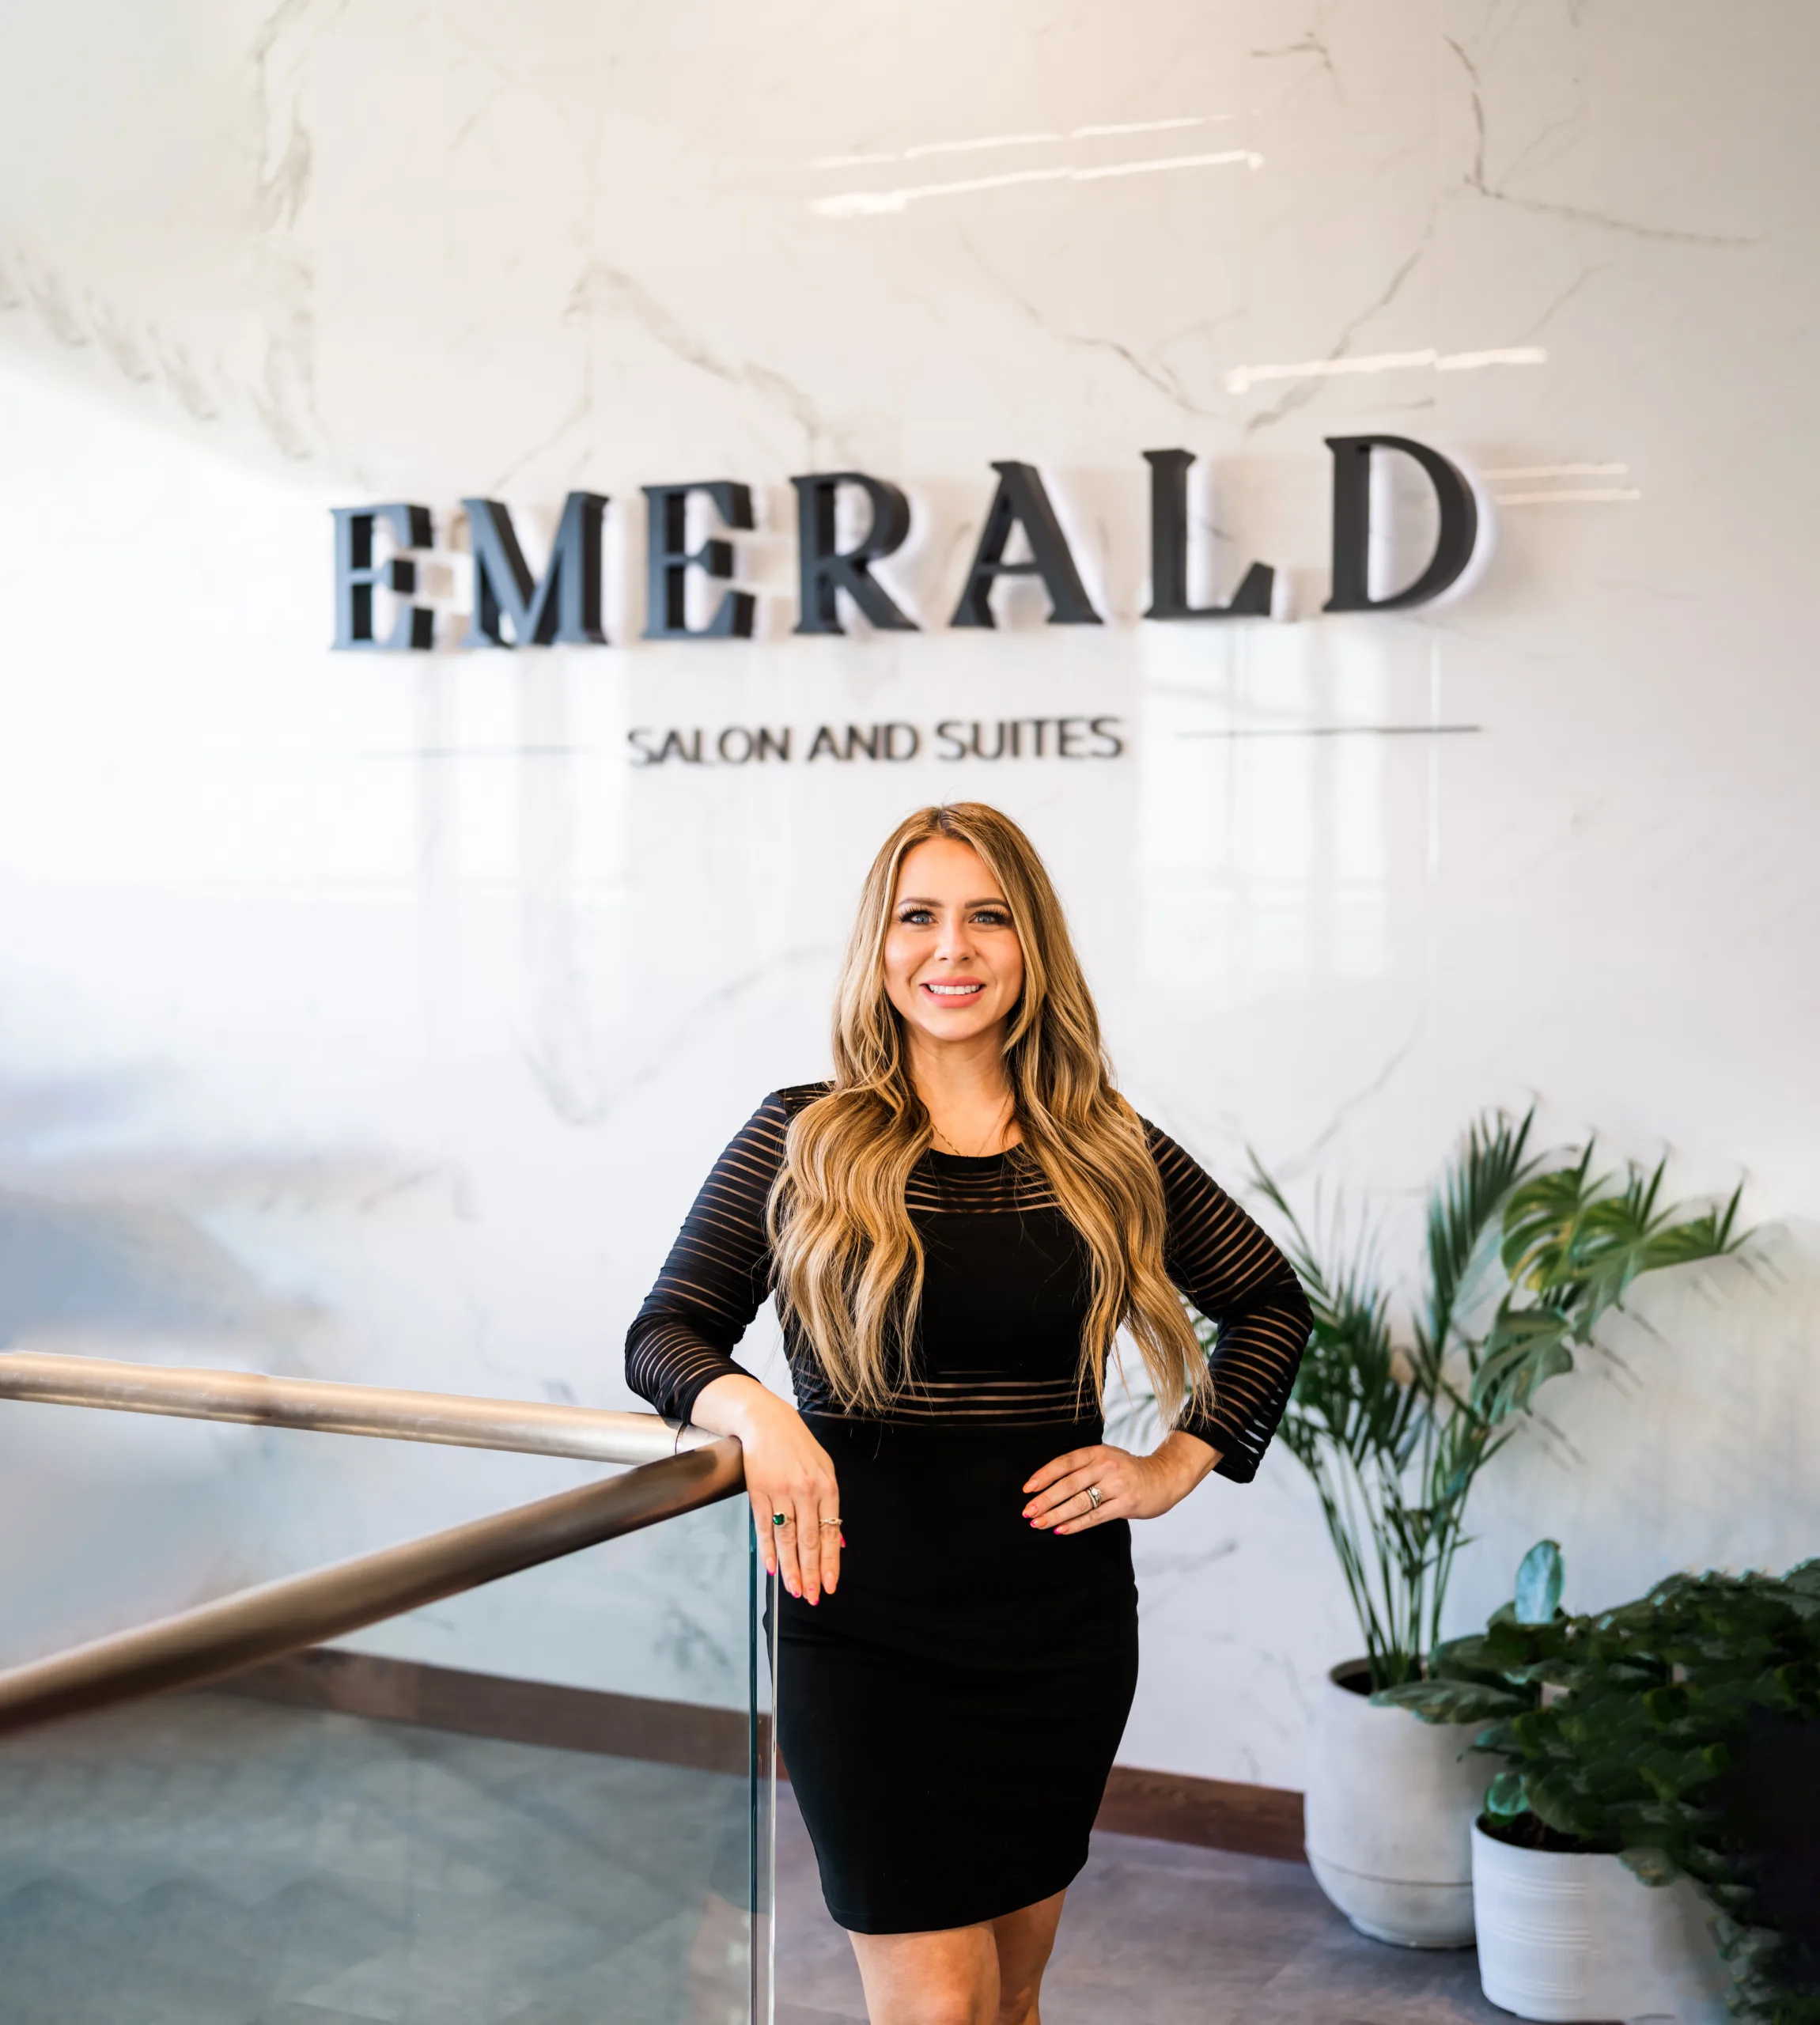 Bethany Neece Emerald Salon and Suites and Lavish Hair Lounge at Harbor Heights